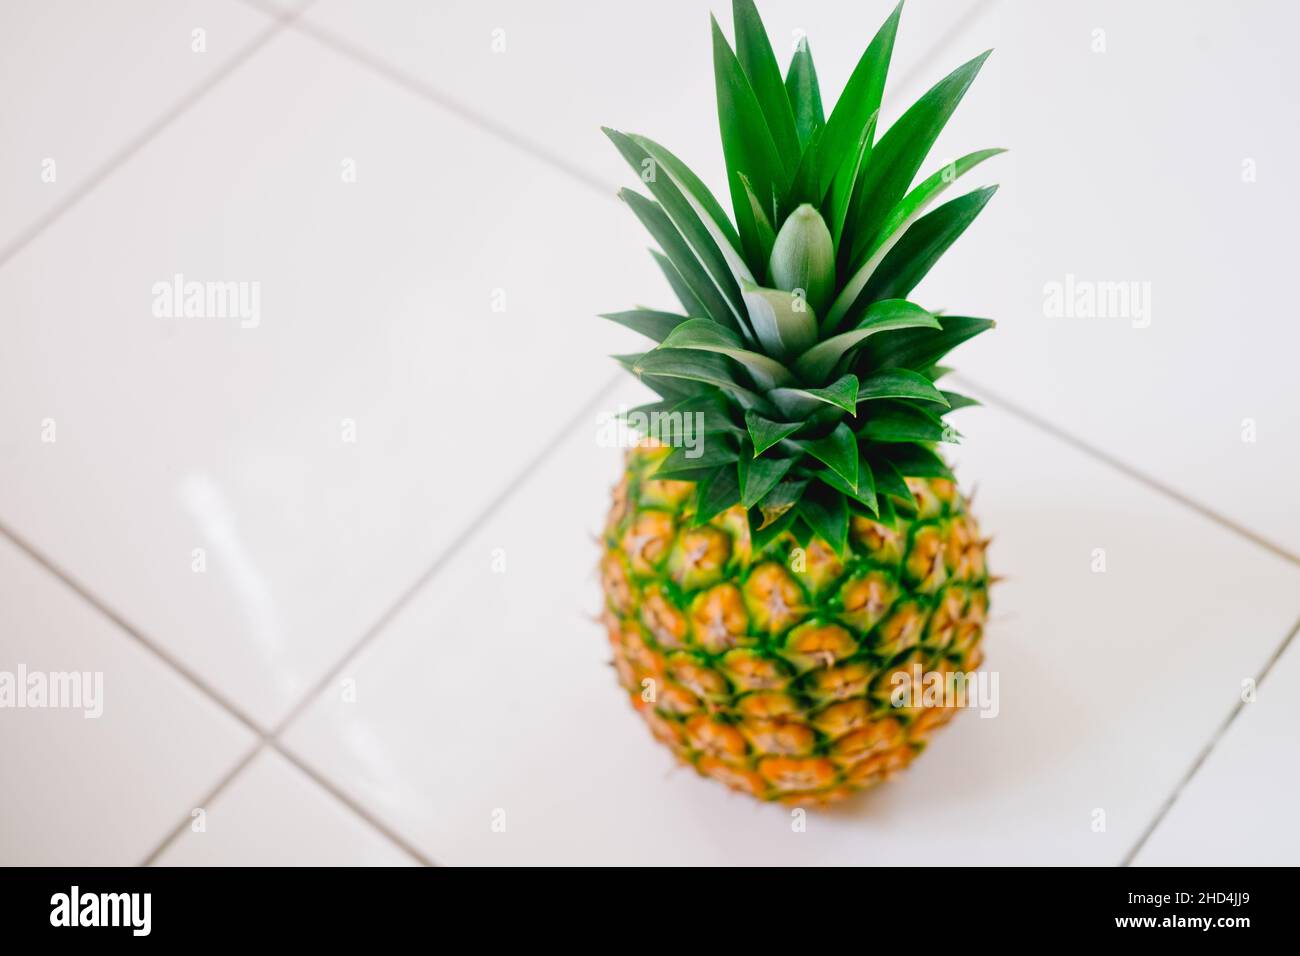 High angle view of freshly picked ripe juicy delicious MG3 variety of whole pineapple fruit on white background. Copy space at the left. Closeup. Stock Photo